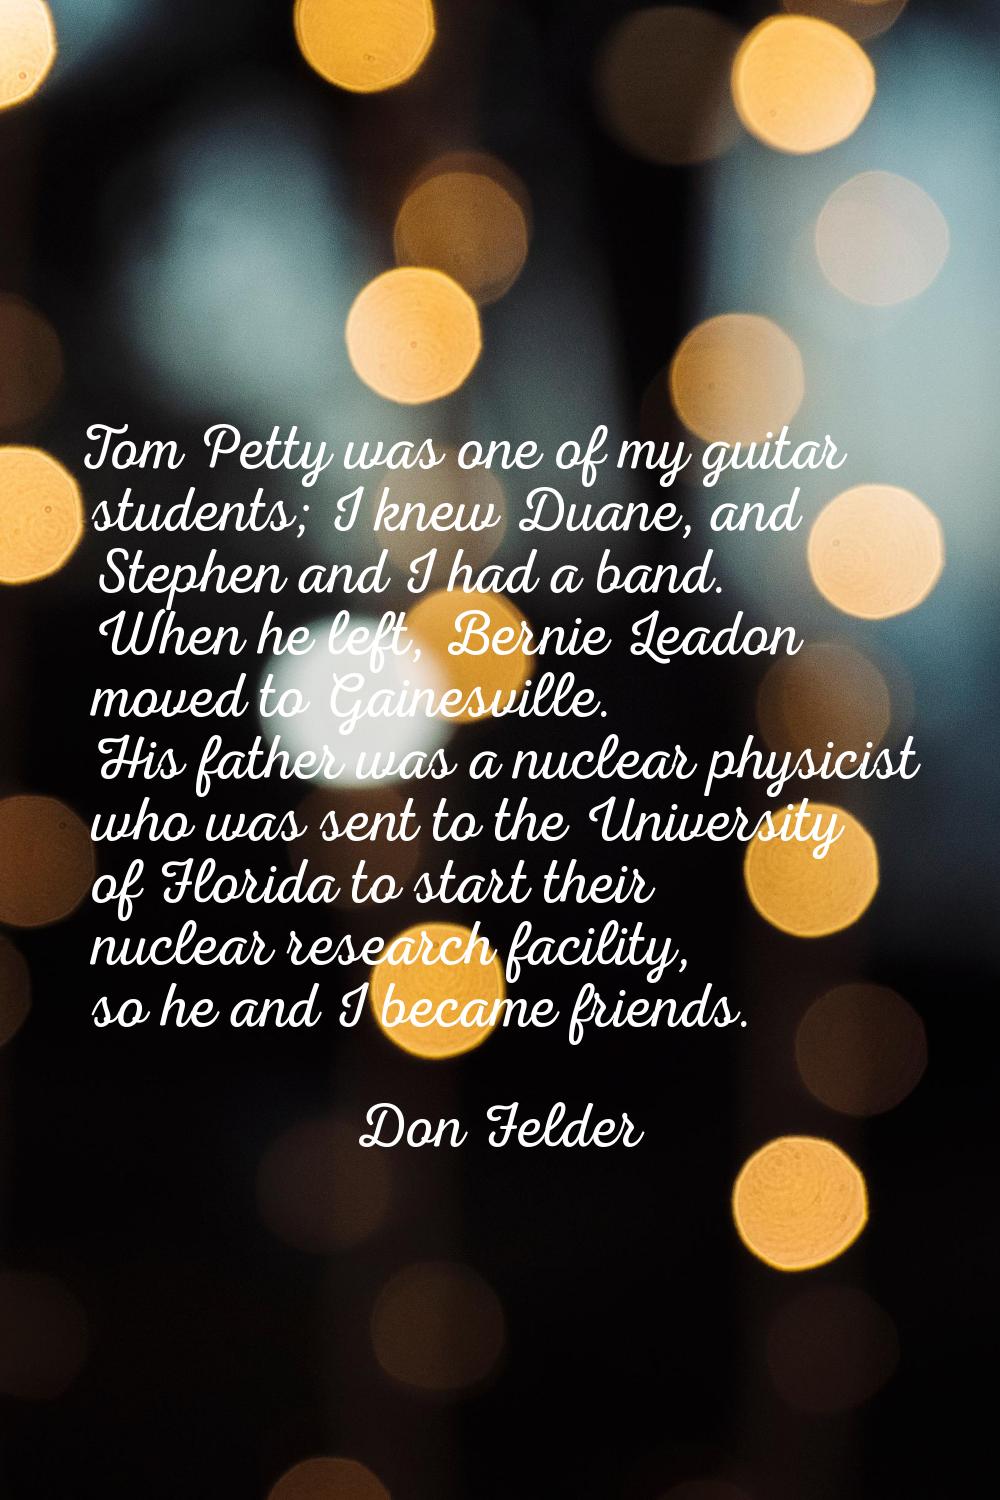 Tom Petty was one of my guitar students; I knew Duane, and Stephen and I had a band. When he left, 